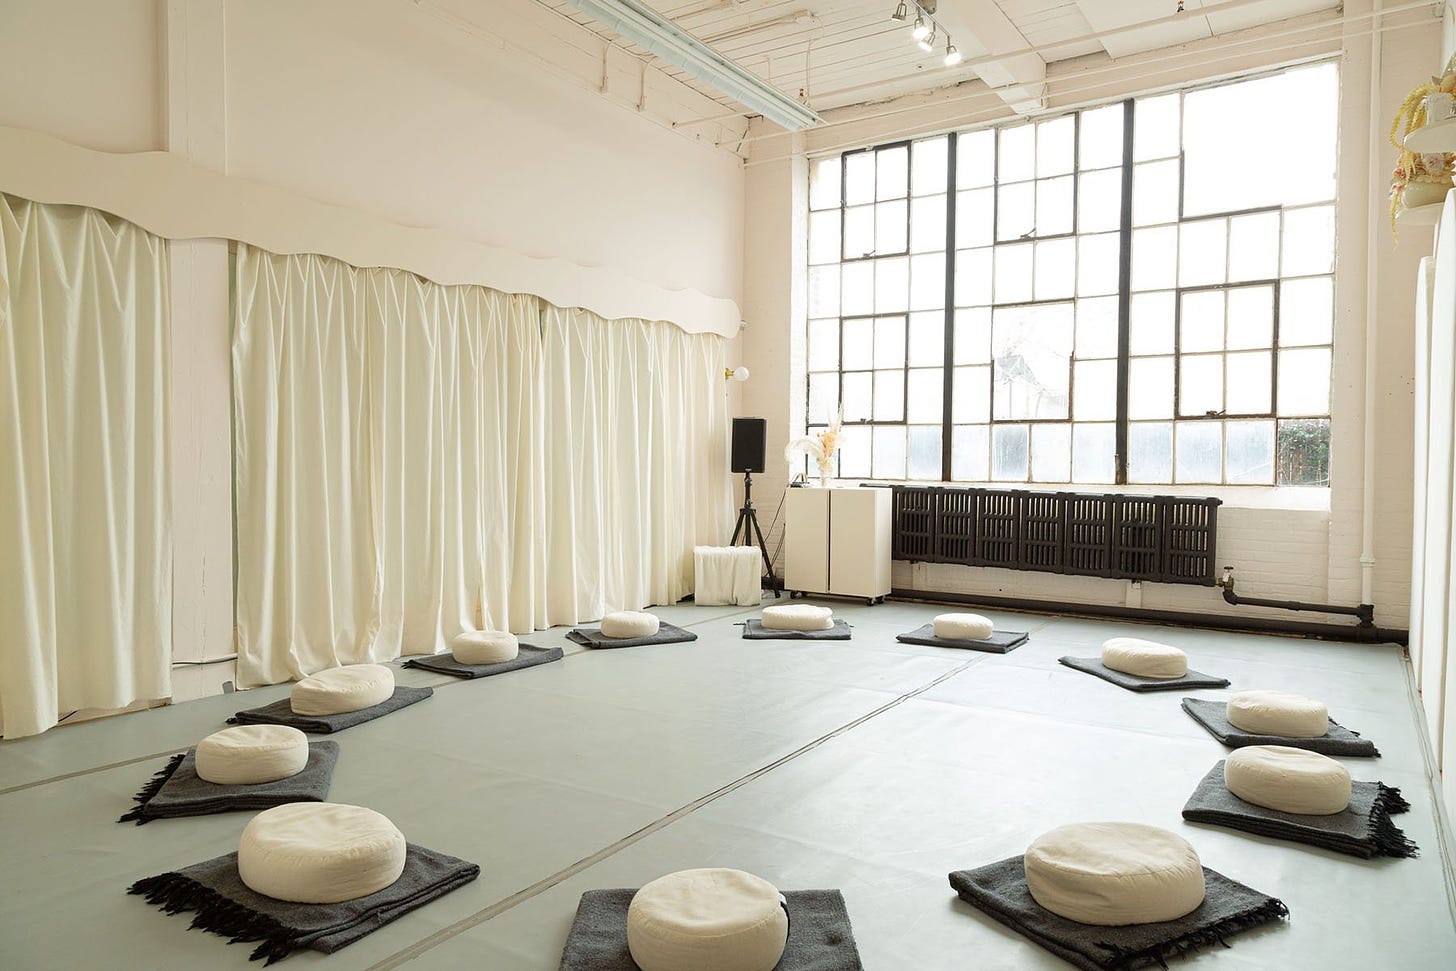 A large movement studio with white walls and gray floors. There's a speaker in the corner and a circle of cushions to sit on. The space has large windows up to the ceiling, letting natural light in.